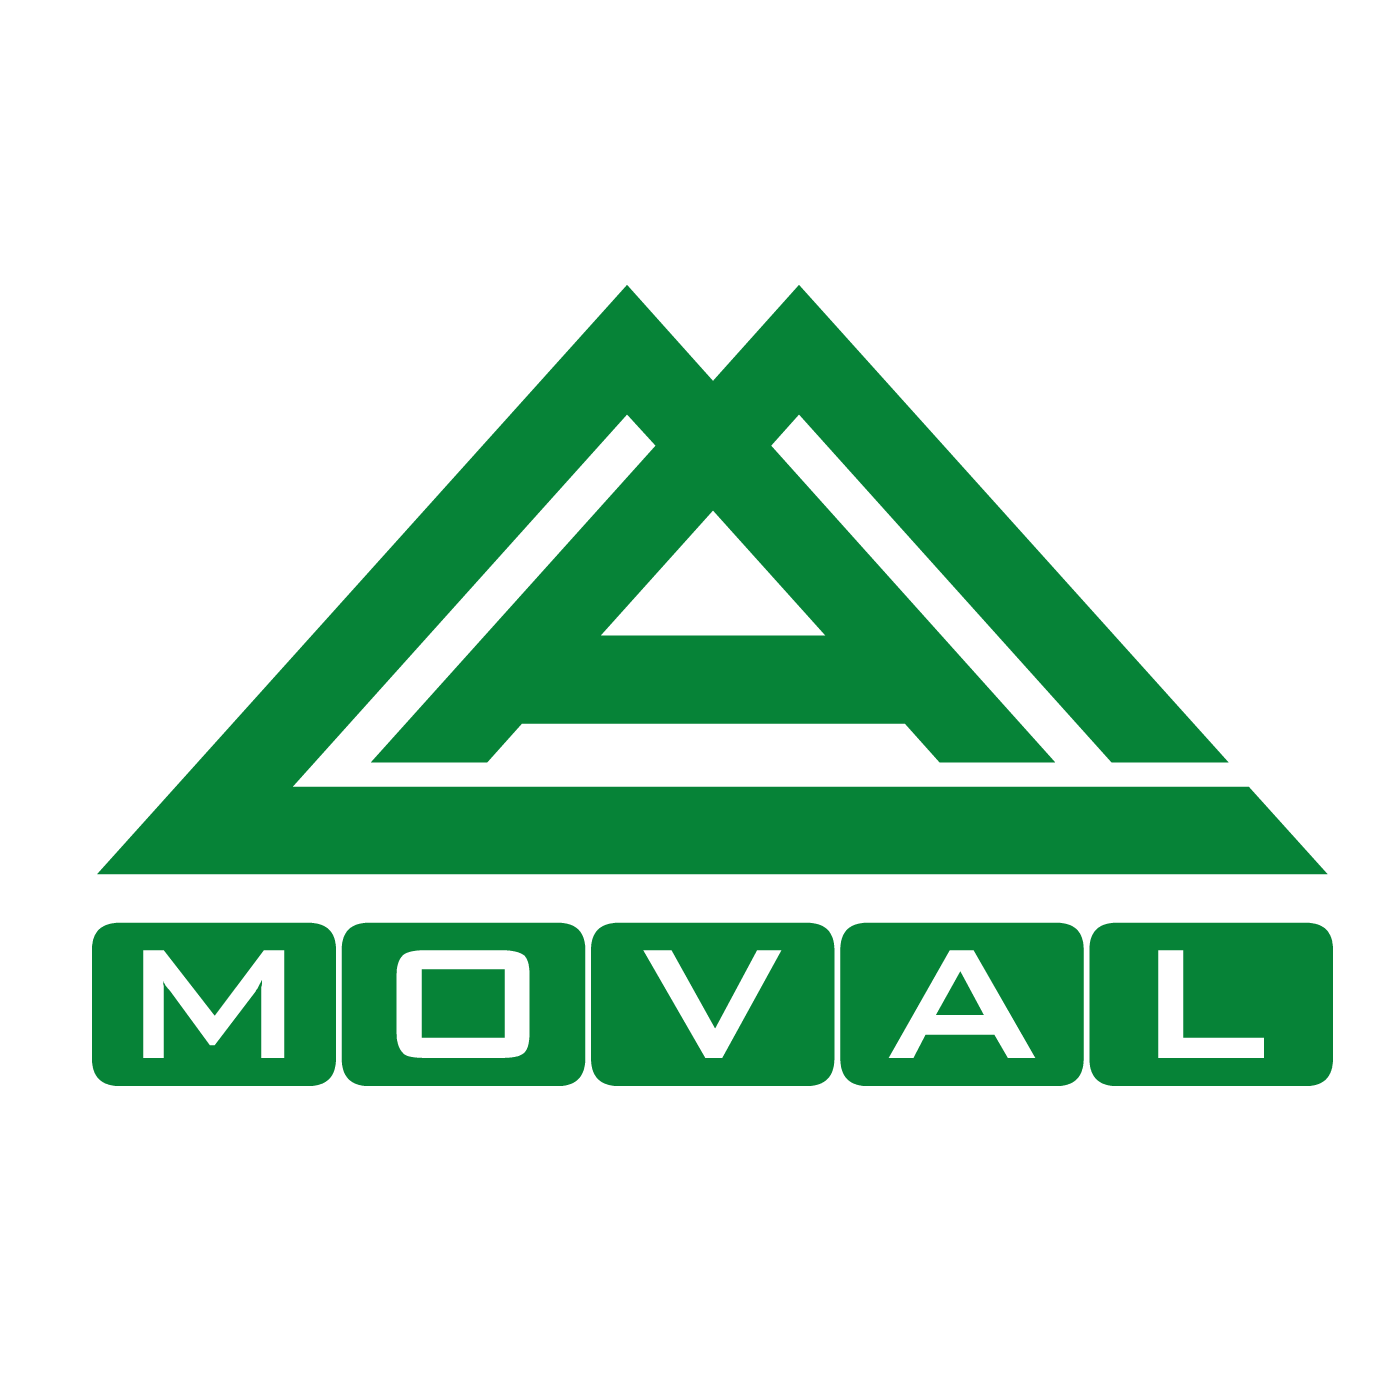 MOVAL